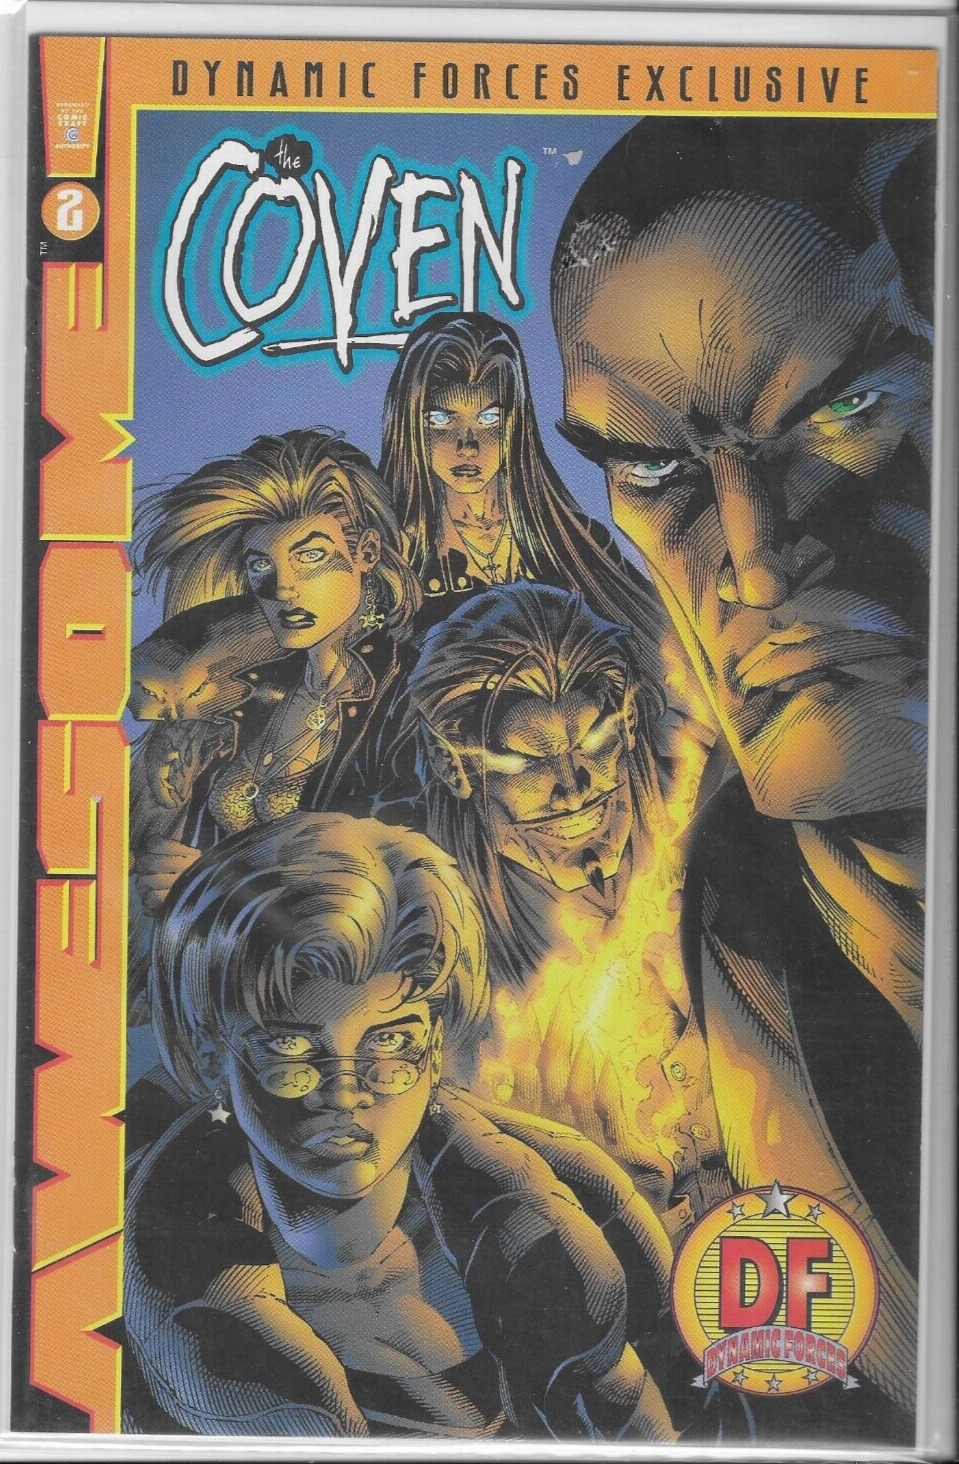 THE COVEN #2 1997 DYNAMIC FORCES EXCLUSIVE VARIANT COVER W/COA #2247 OF 3500